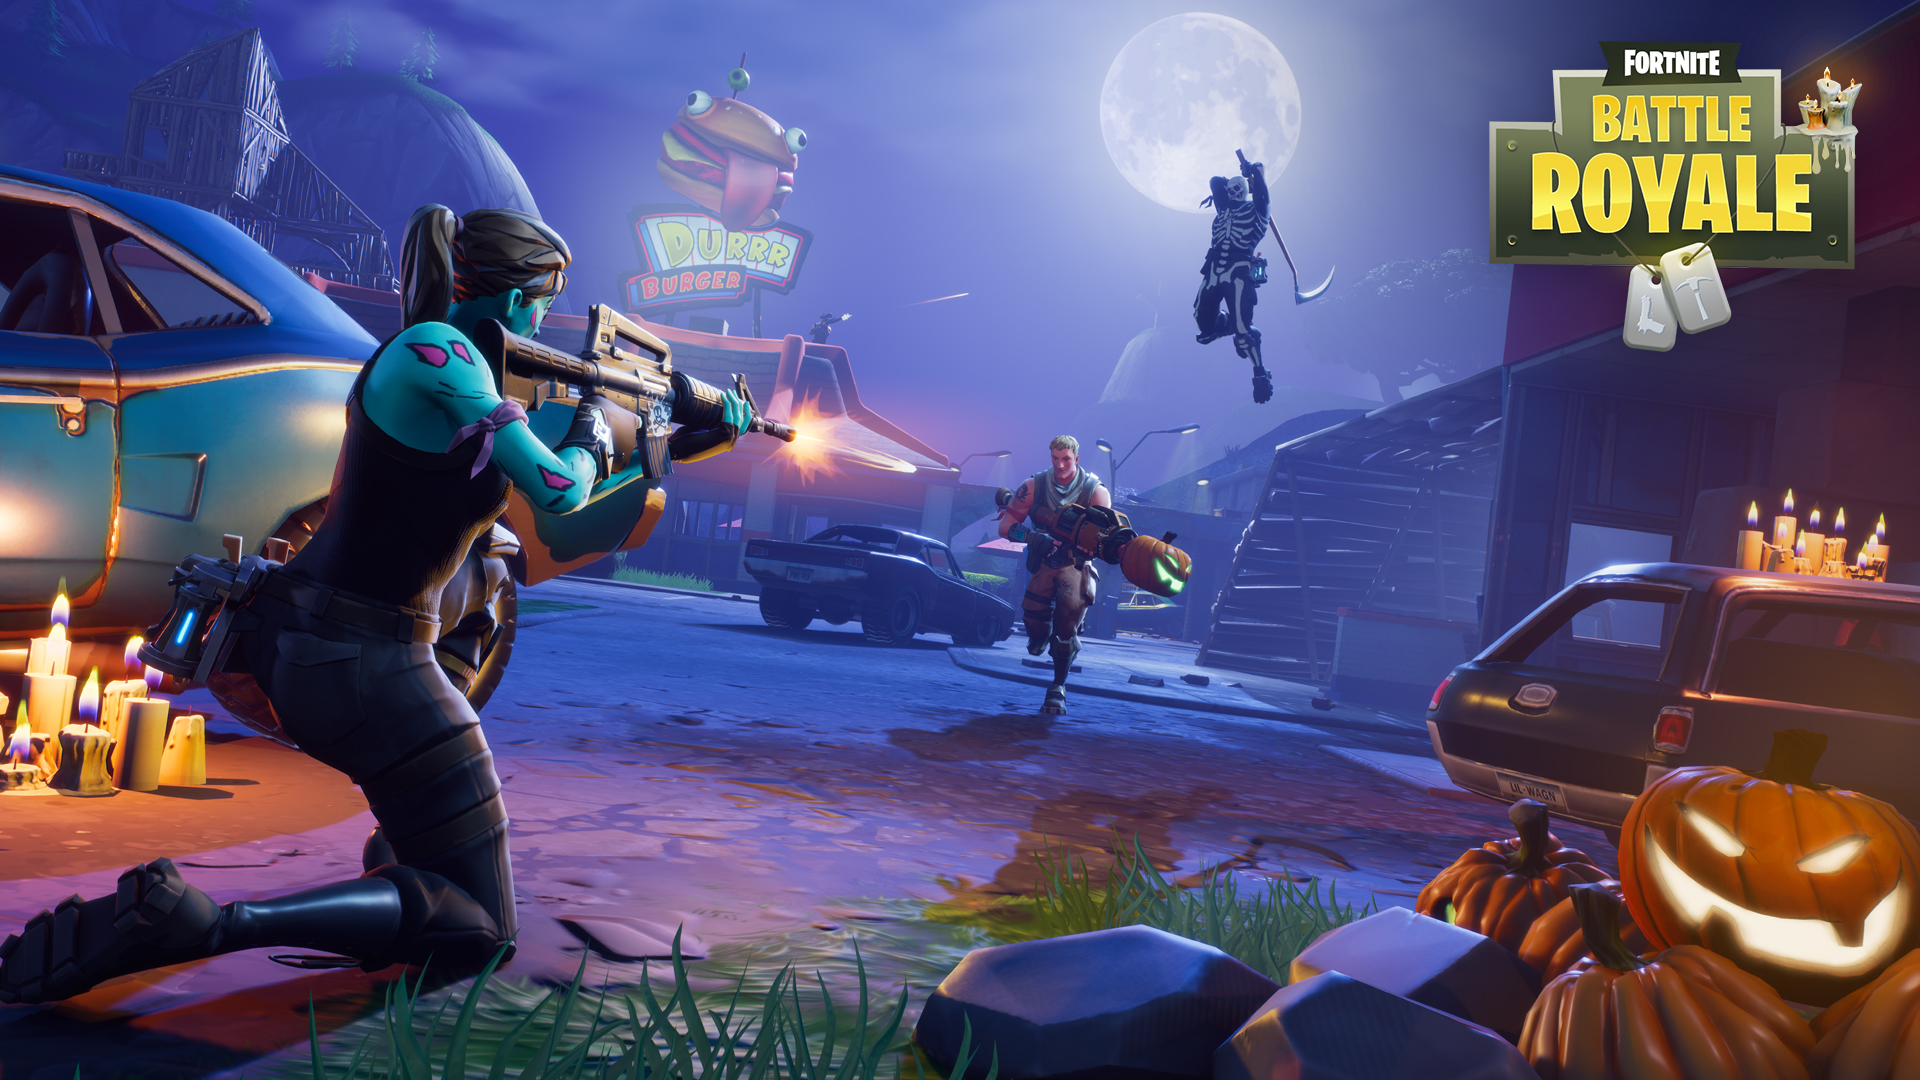 92 Fortnite Season 3 Wallpapers On Wallpapersafari We hope you enjoy our growing collection of hd images to use as a background or home screen for your smartphone or computer. 92 fortnite season 3 wallpapers on